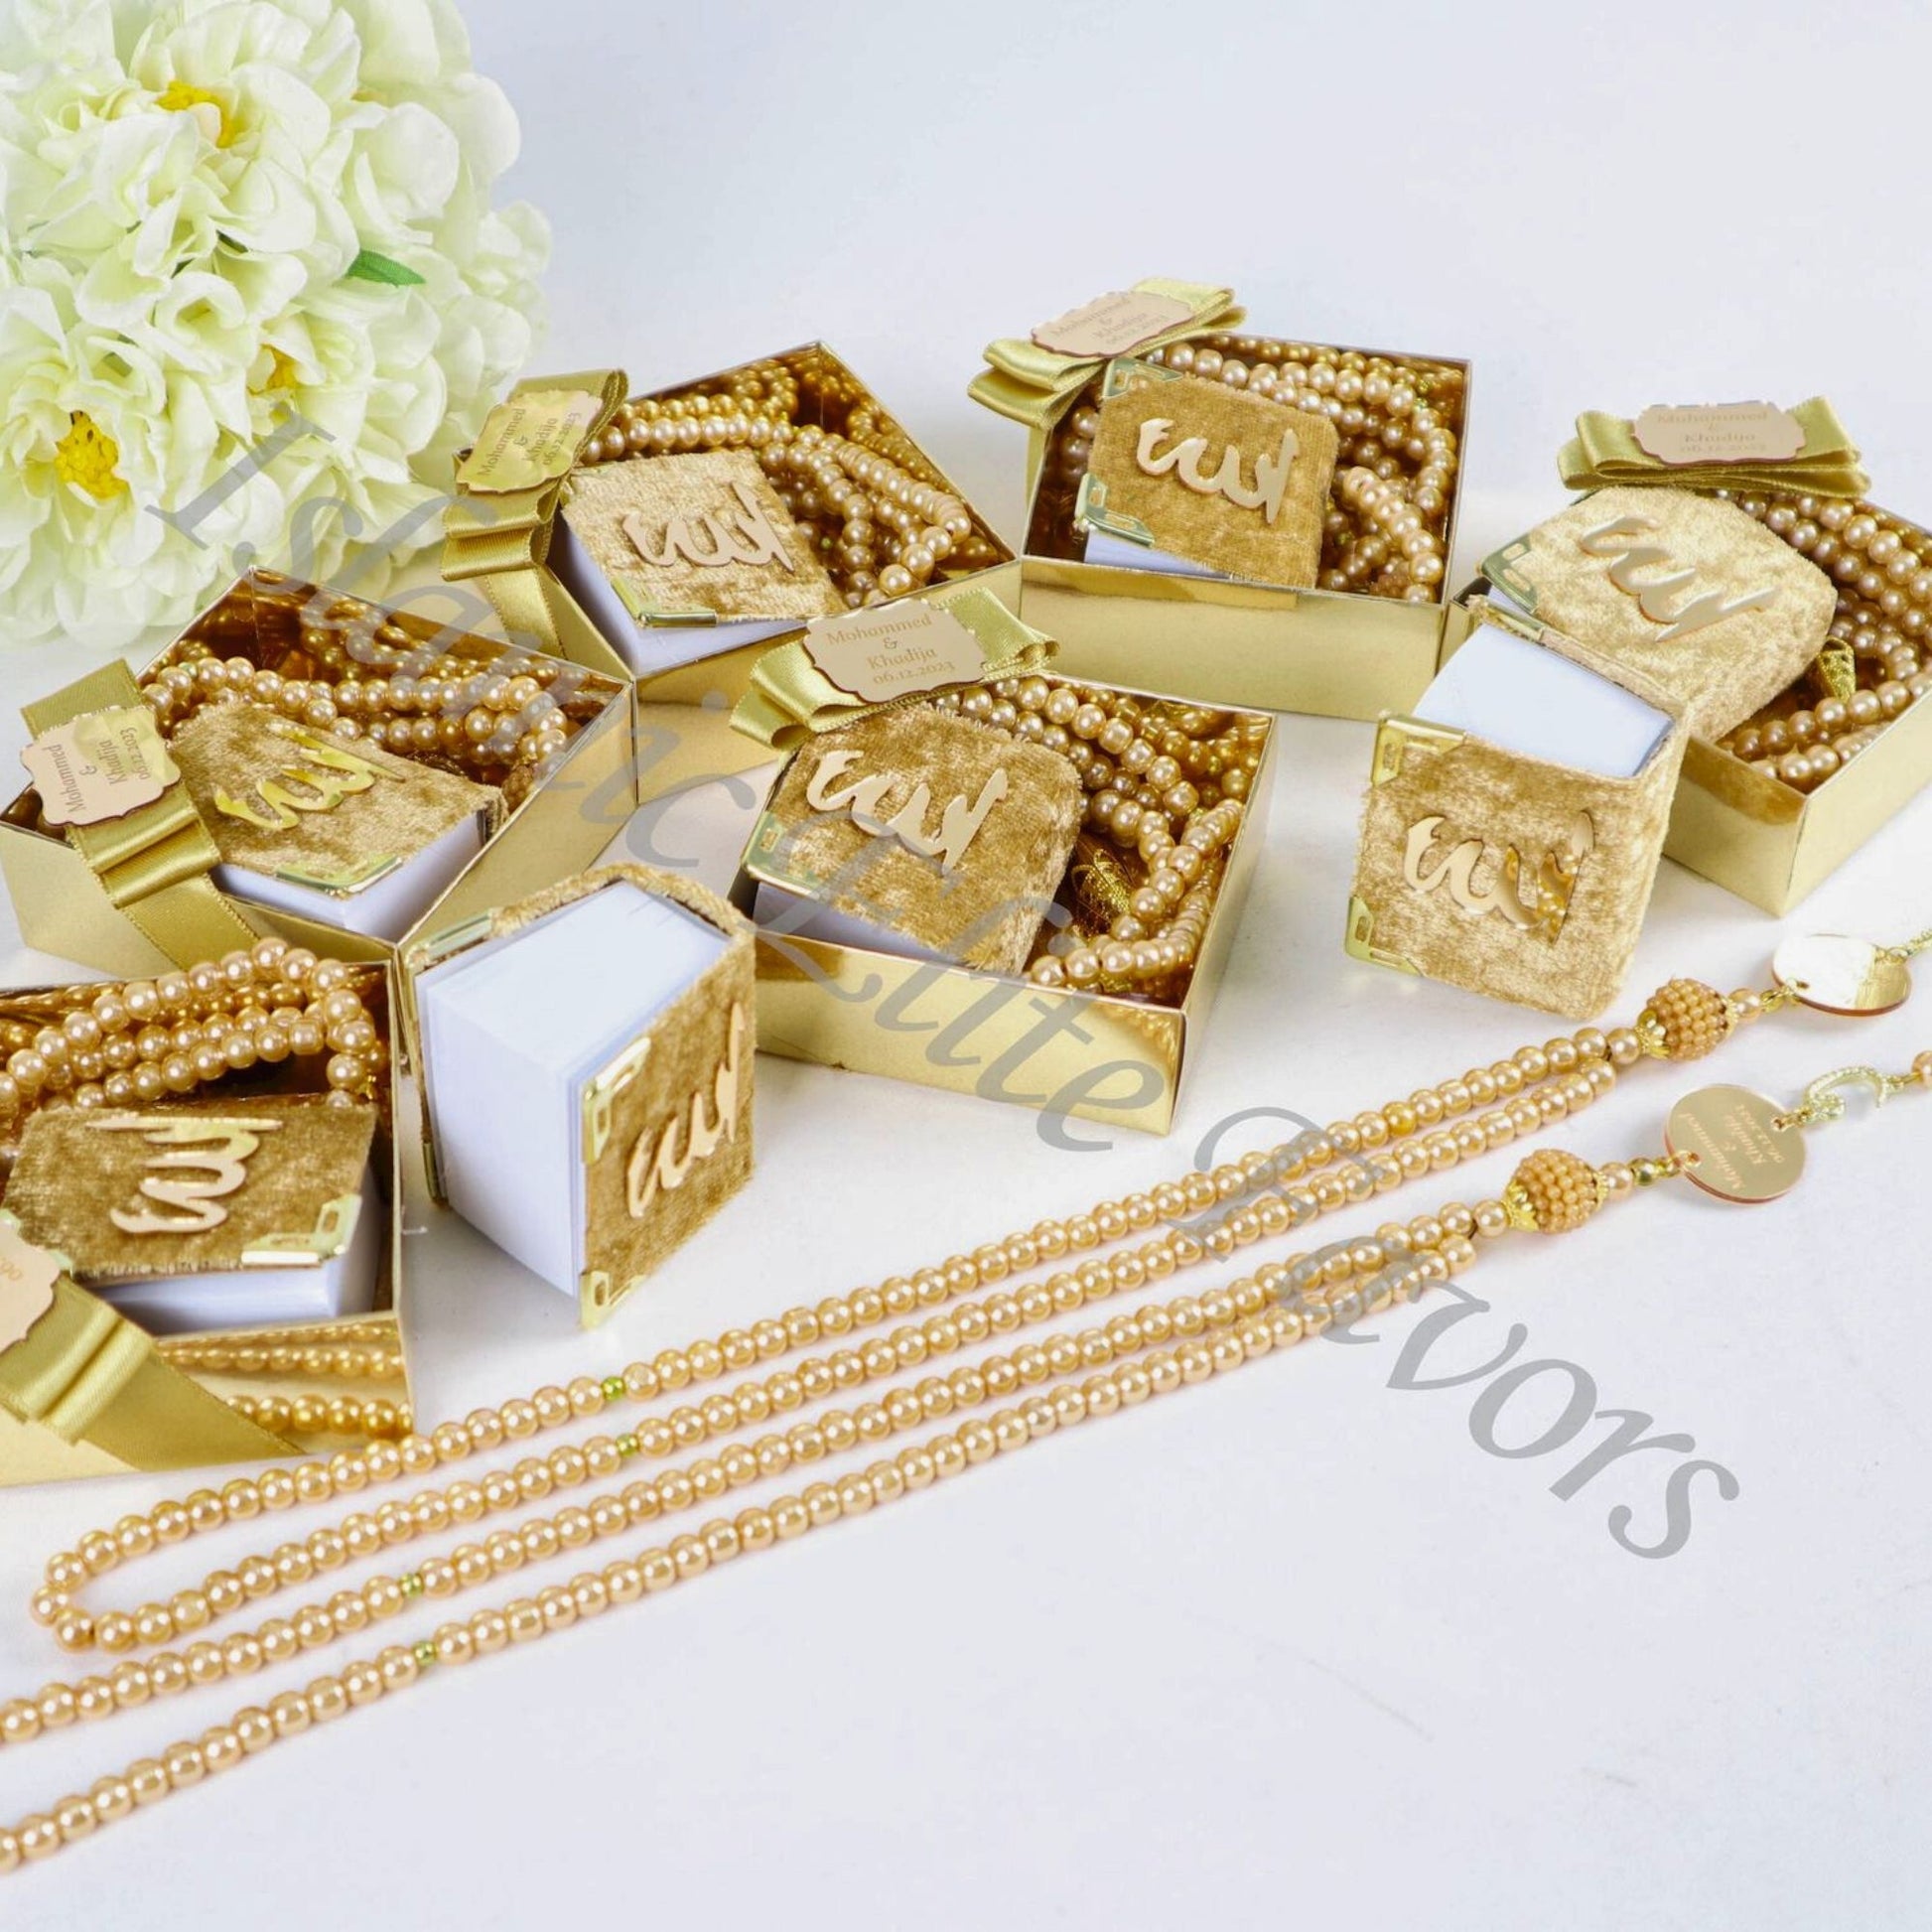 Personalized Mini Quran Pearl Prayer Bead Gold Tag Décor Wedding Favor - Islamic Elite Favors is a handmade gift shop offering a wide variety of unique and personalized gifts for all occasions. Whether you're looking for the perfect Ramadan, Eid, Hajj, wedding gift or something special for a birthday, baby shower or anniversary, we have something for everyone. High quality, made with love.